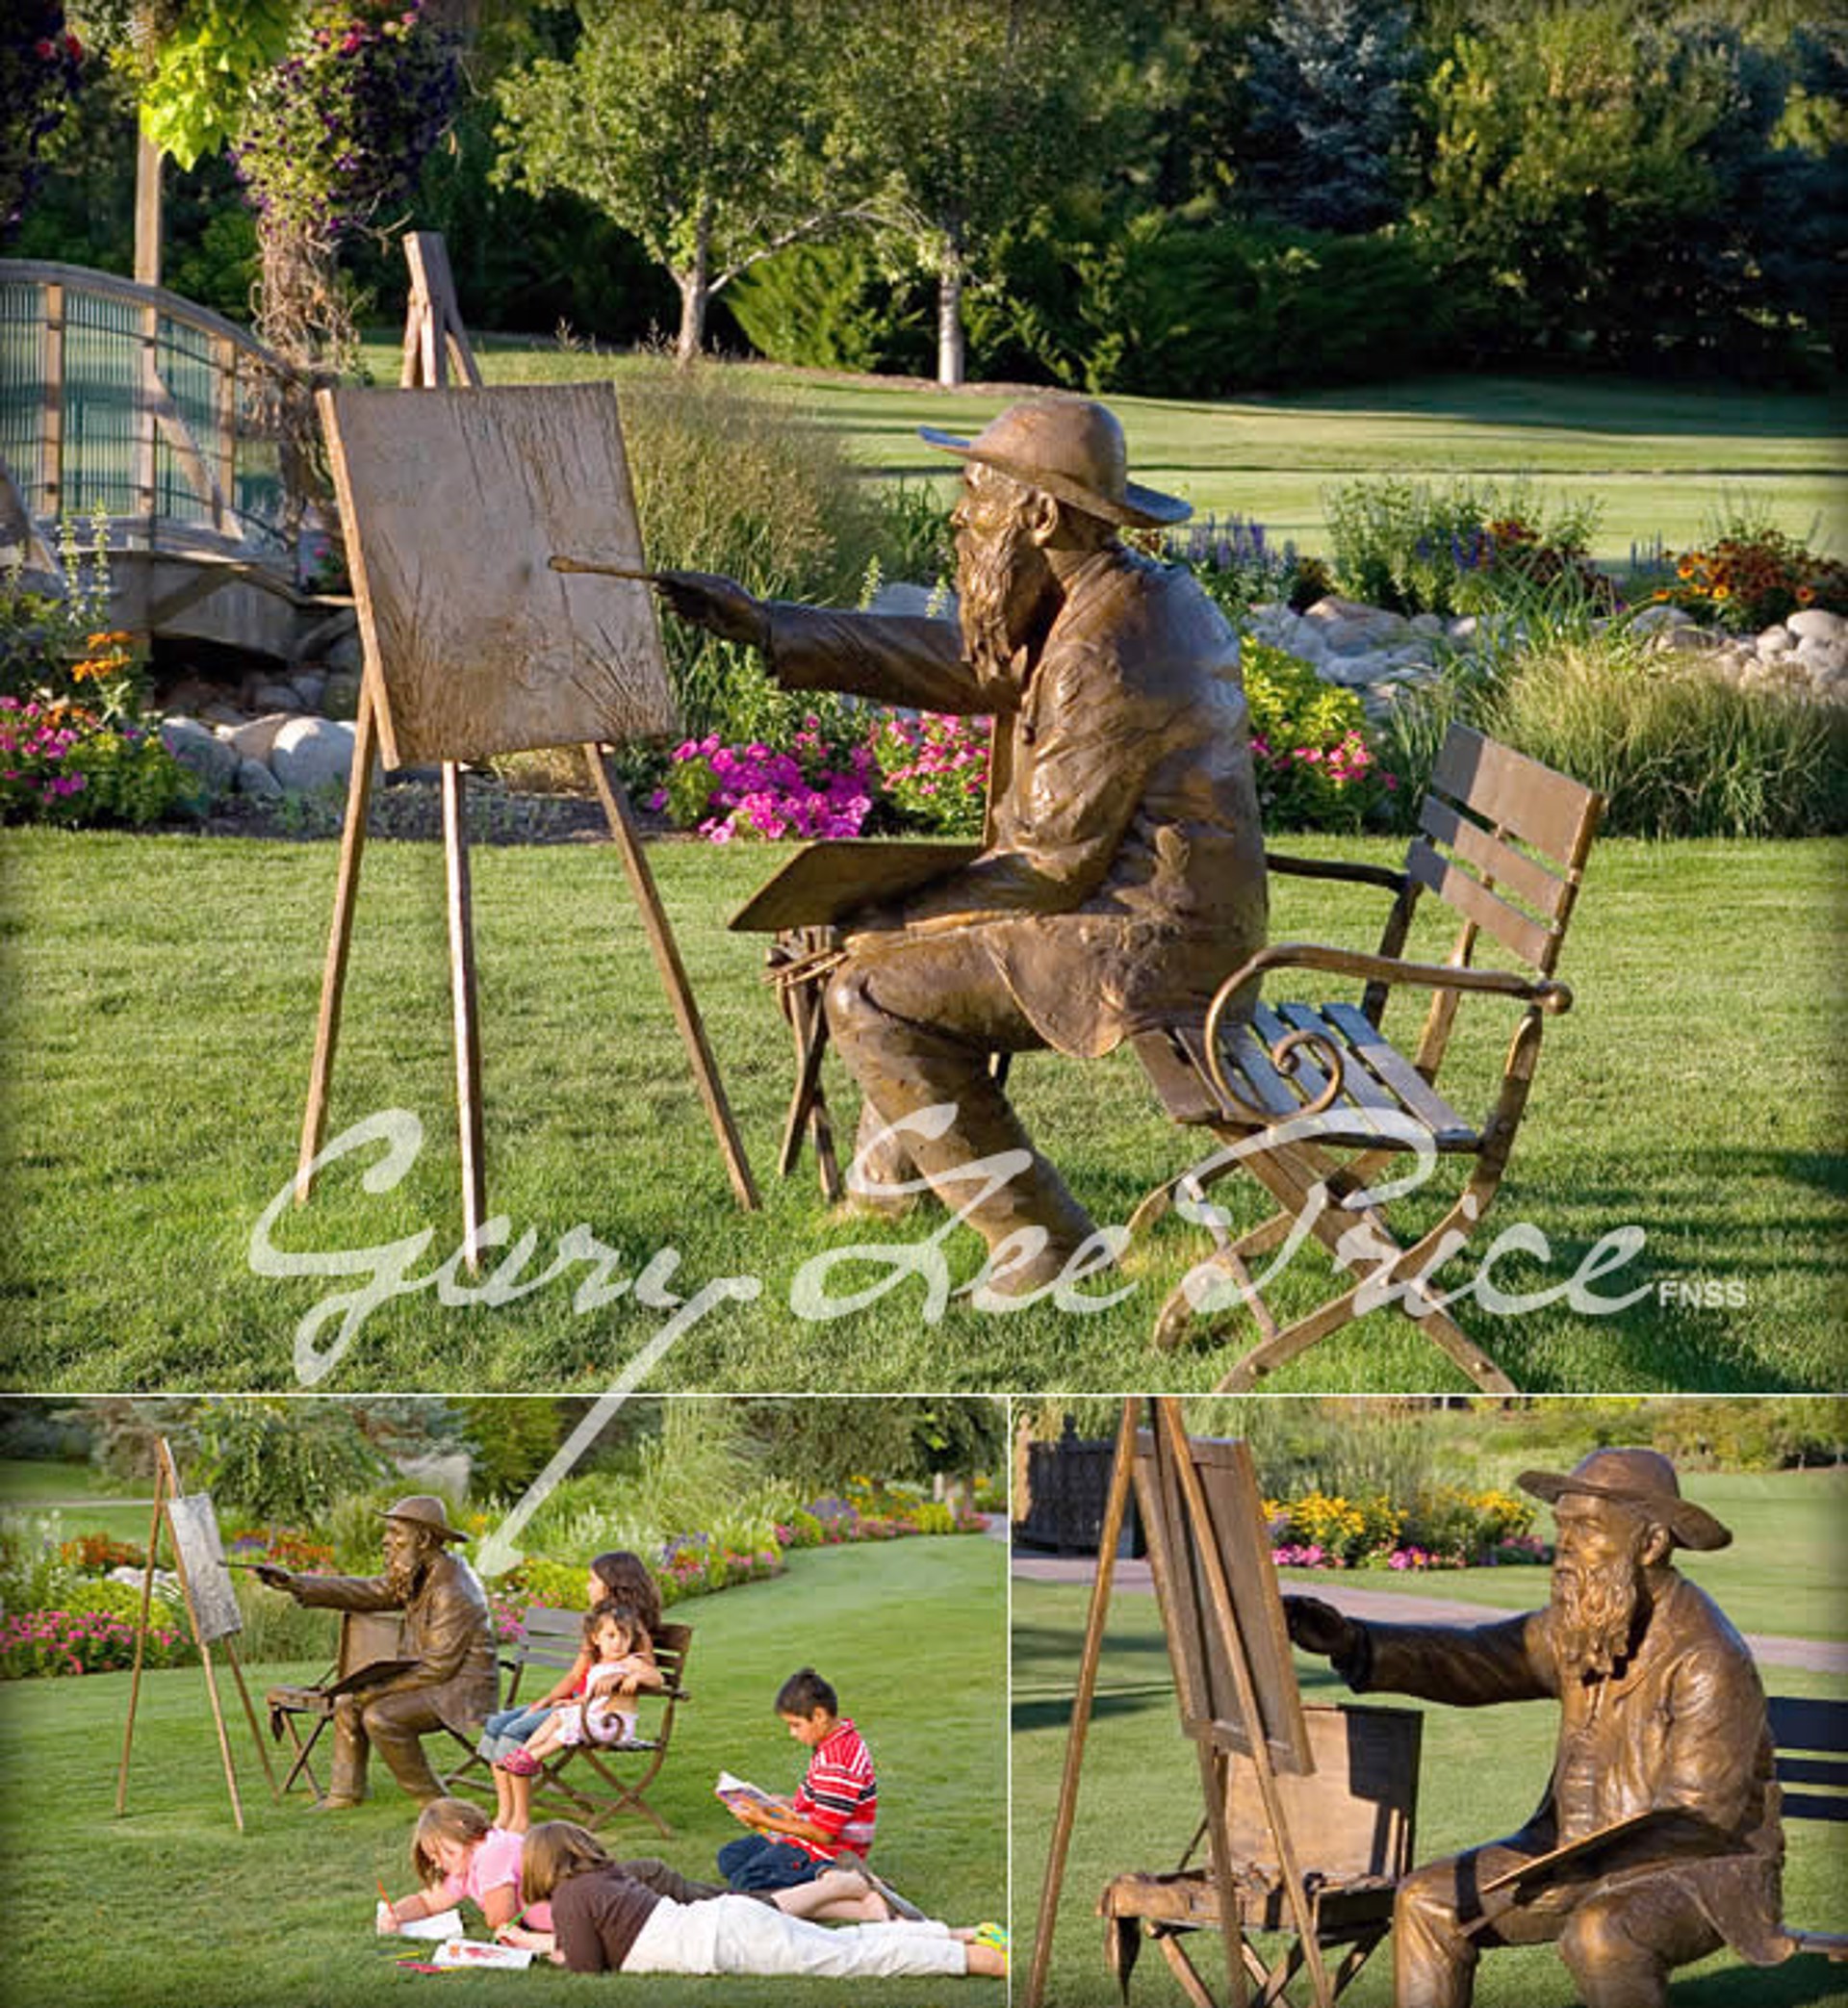 Monet Bench by Gary Lee Price (sculptor)